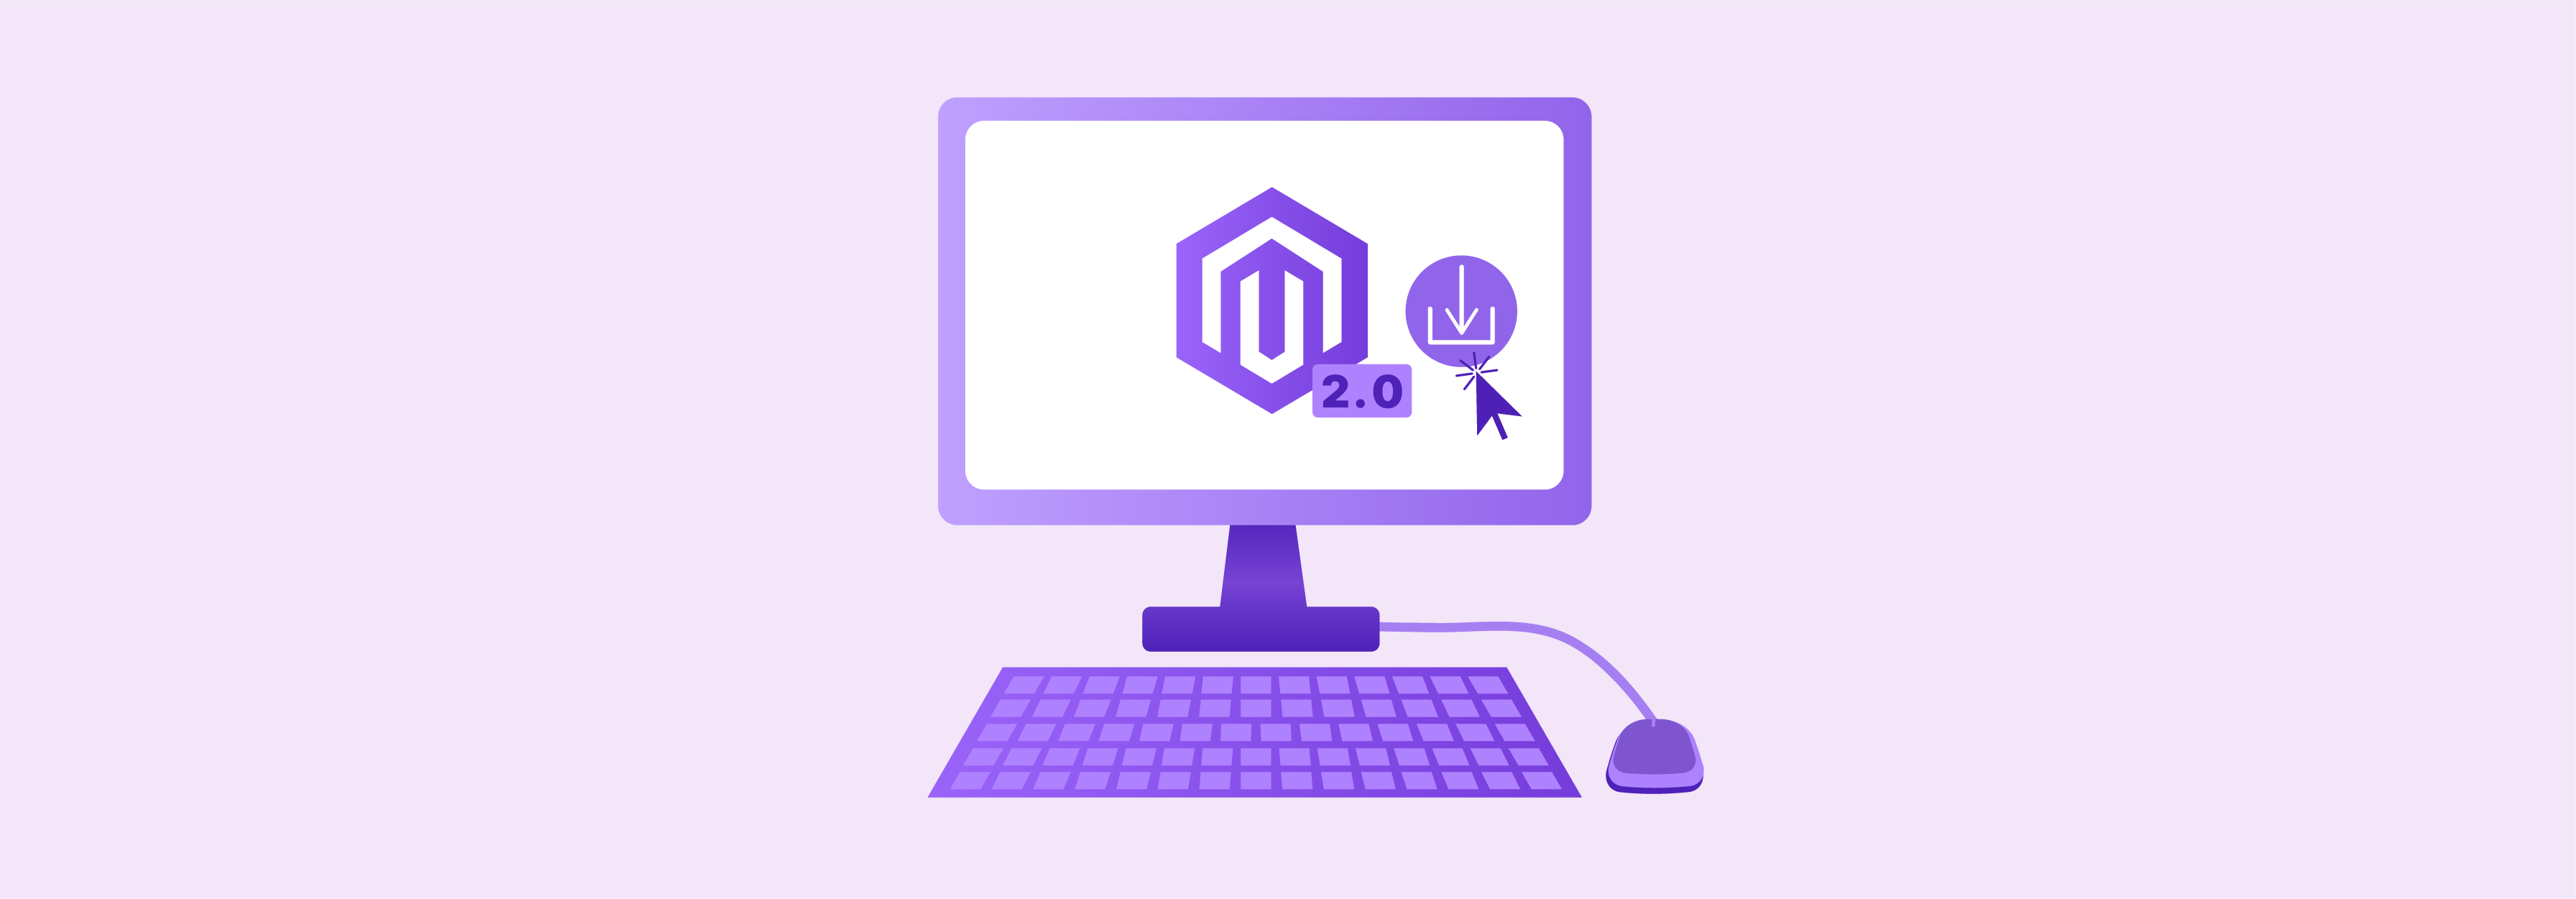 Simplifying Magento 2.0 setup with one-click installation feature